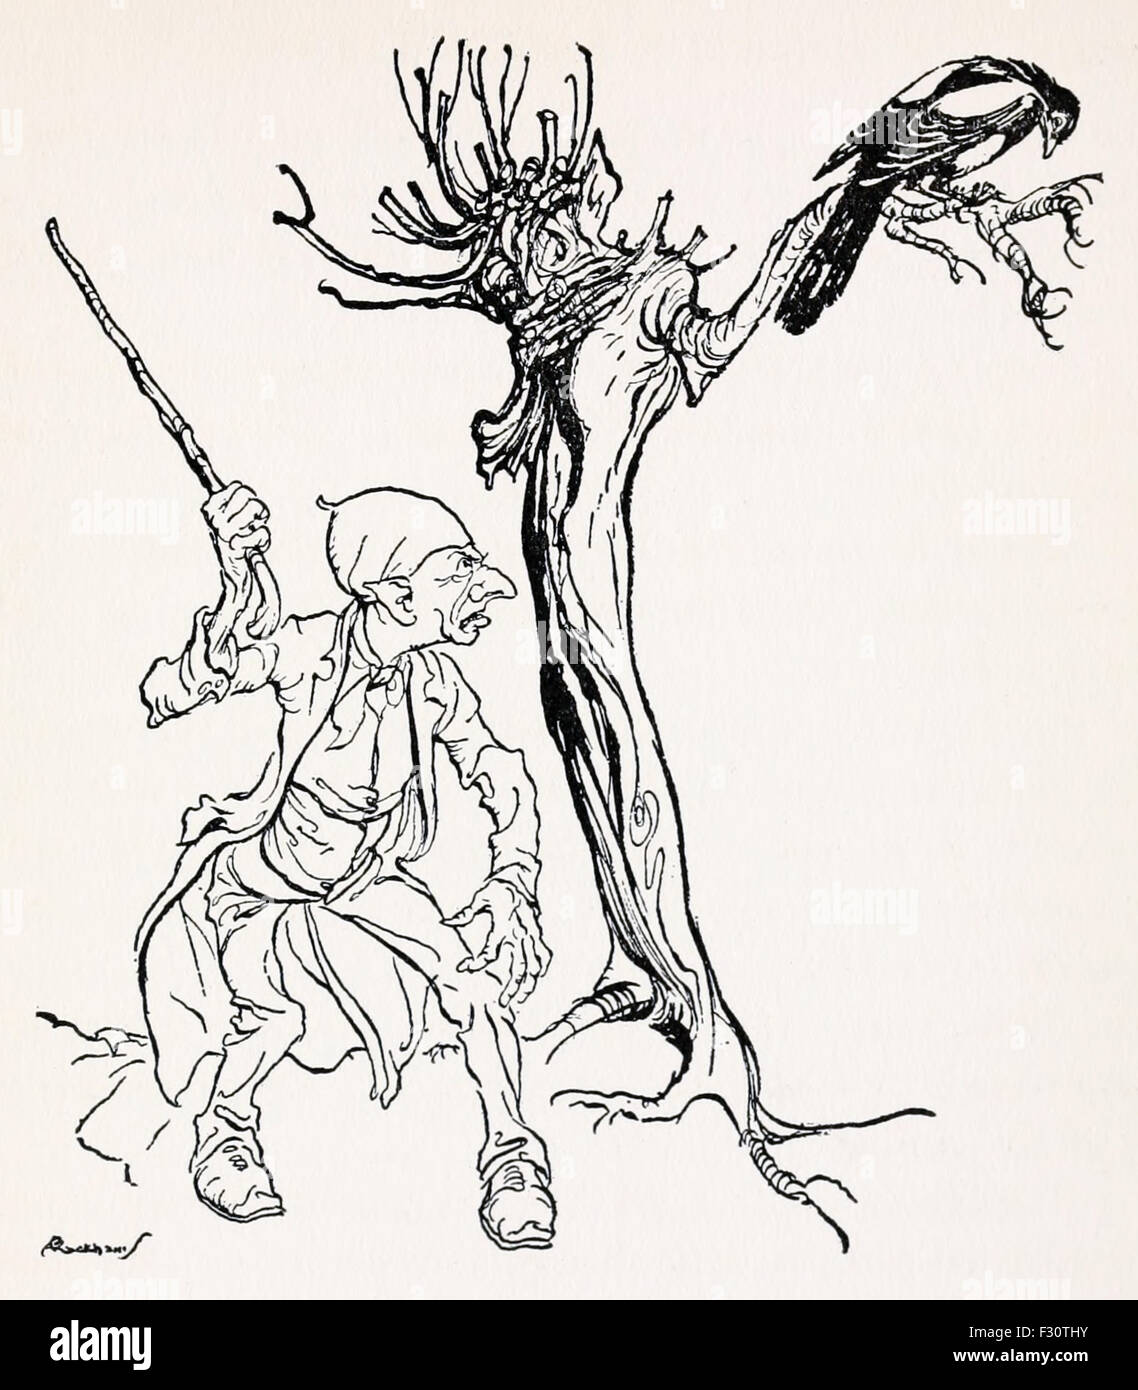 Mr Vinegar throwing his stick at a Magpie in a tree from 'Mr and Mrs Vinegar' in 'English Fairy Tales', illustration by Arthur Rackham (1867-1939). See description for more information. Stock Photo